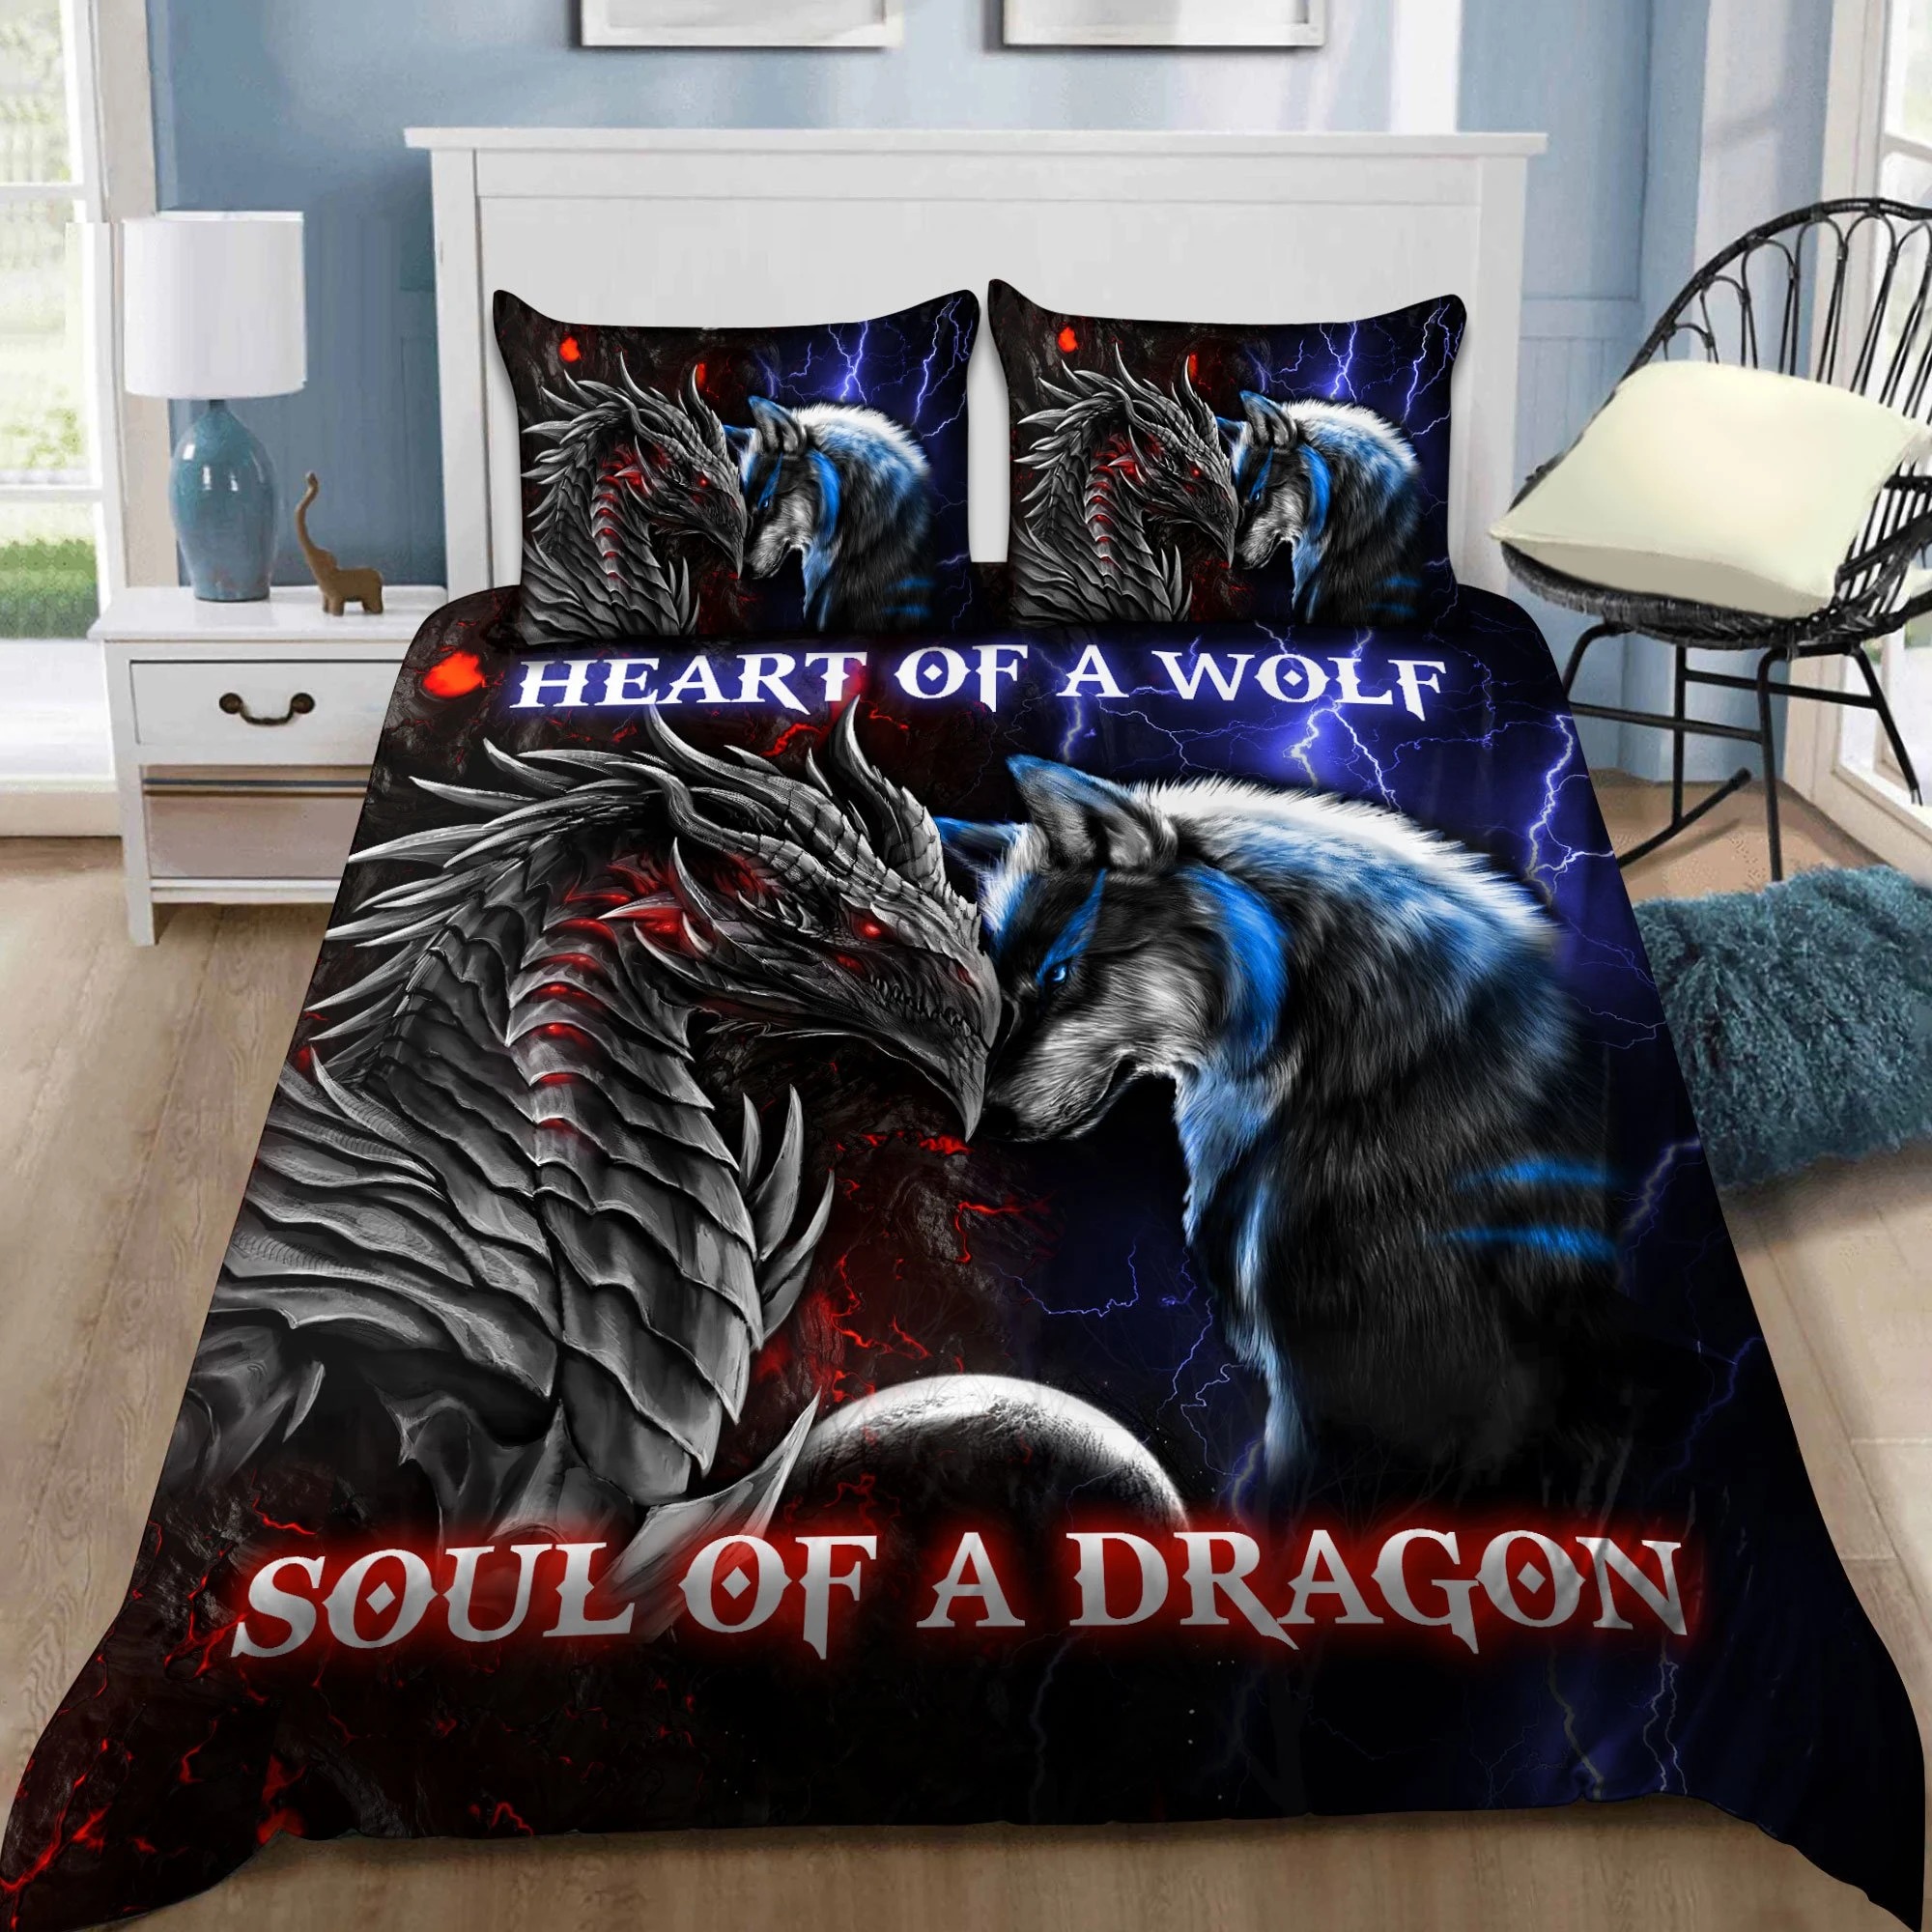 Heart of a wolf soul of a dragon bedding set